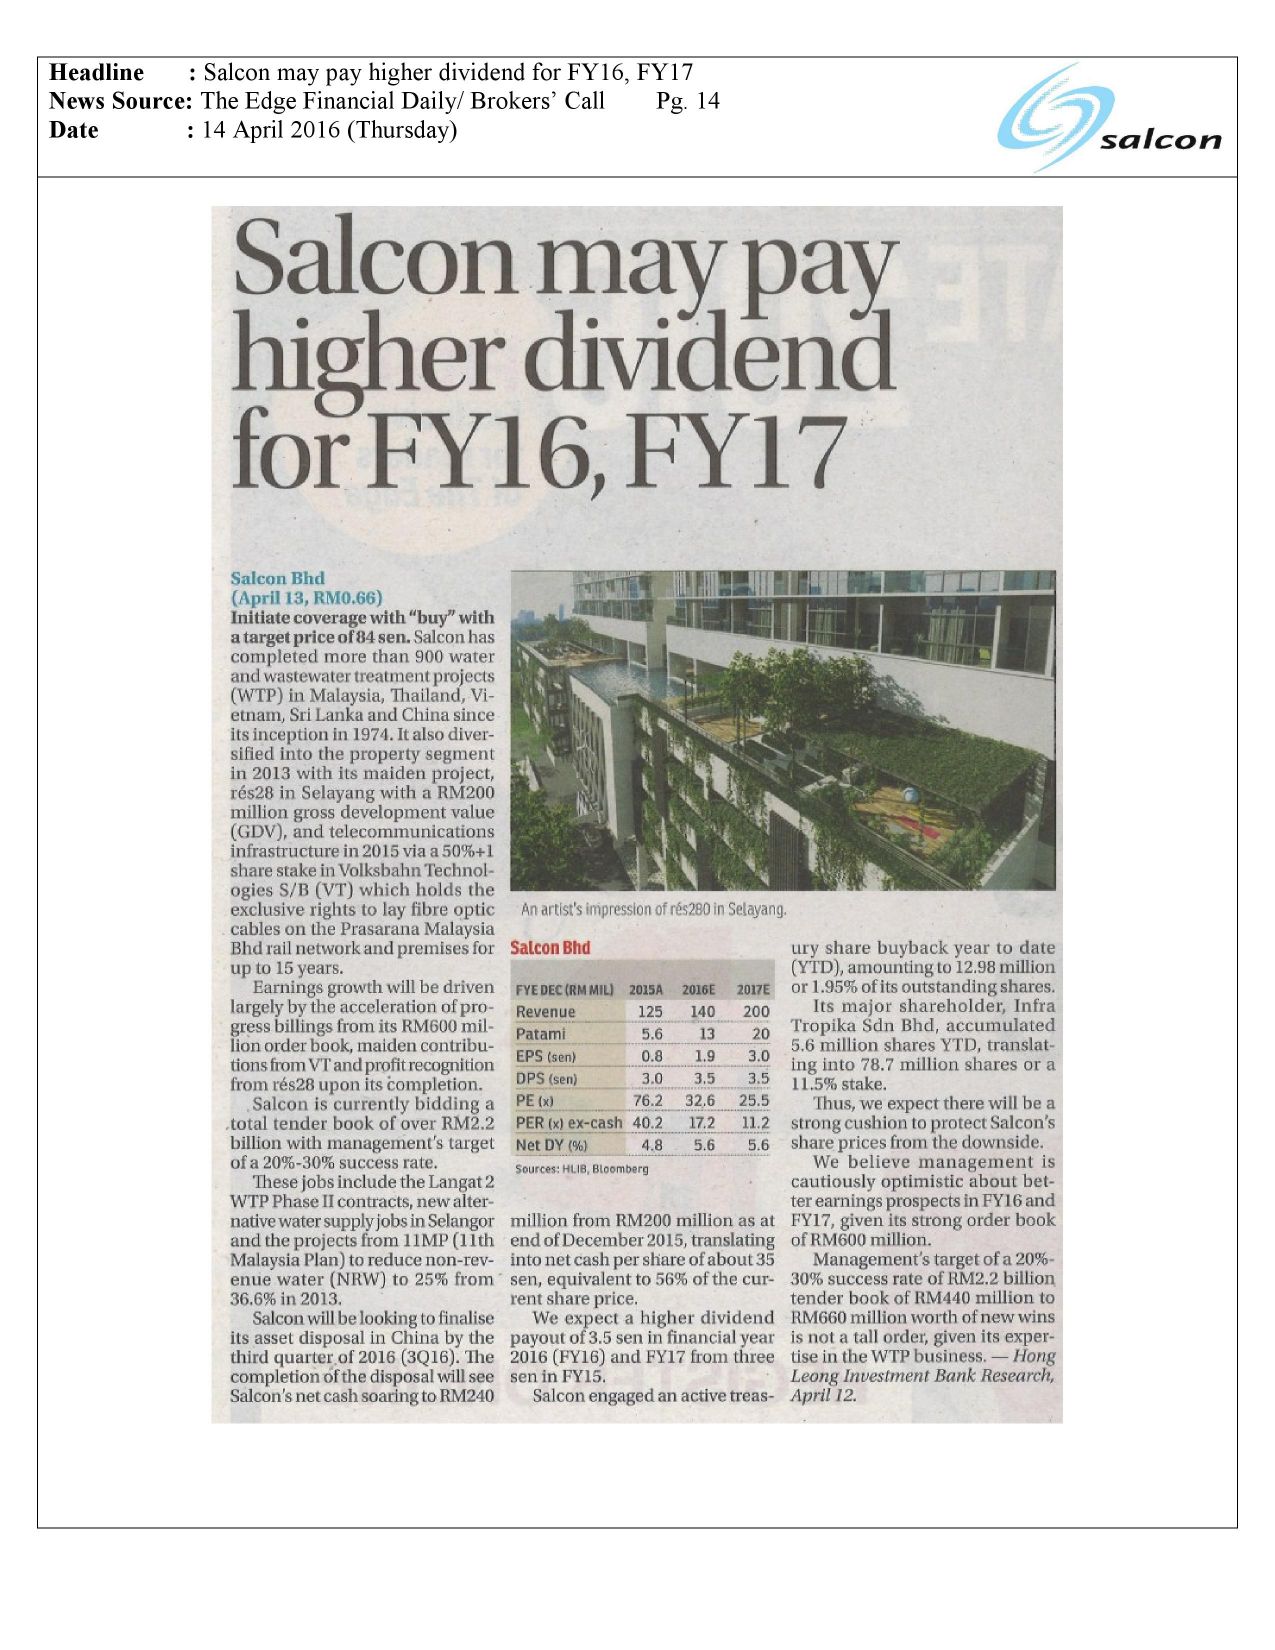 Salcon may pay higher dividend for FY16, FY17